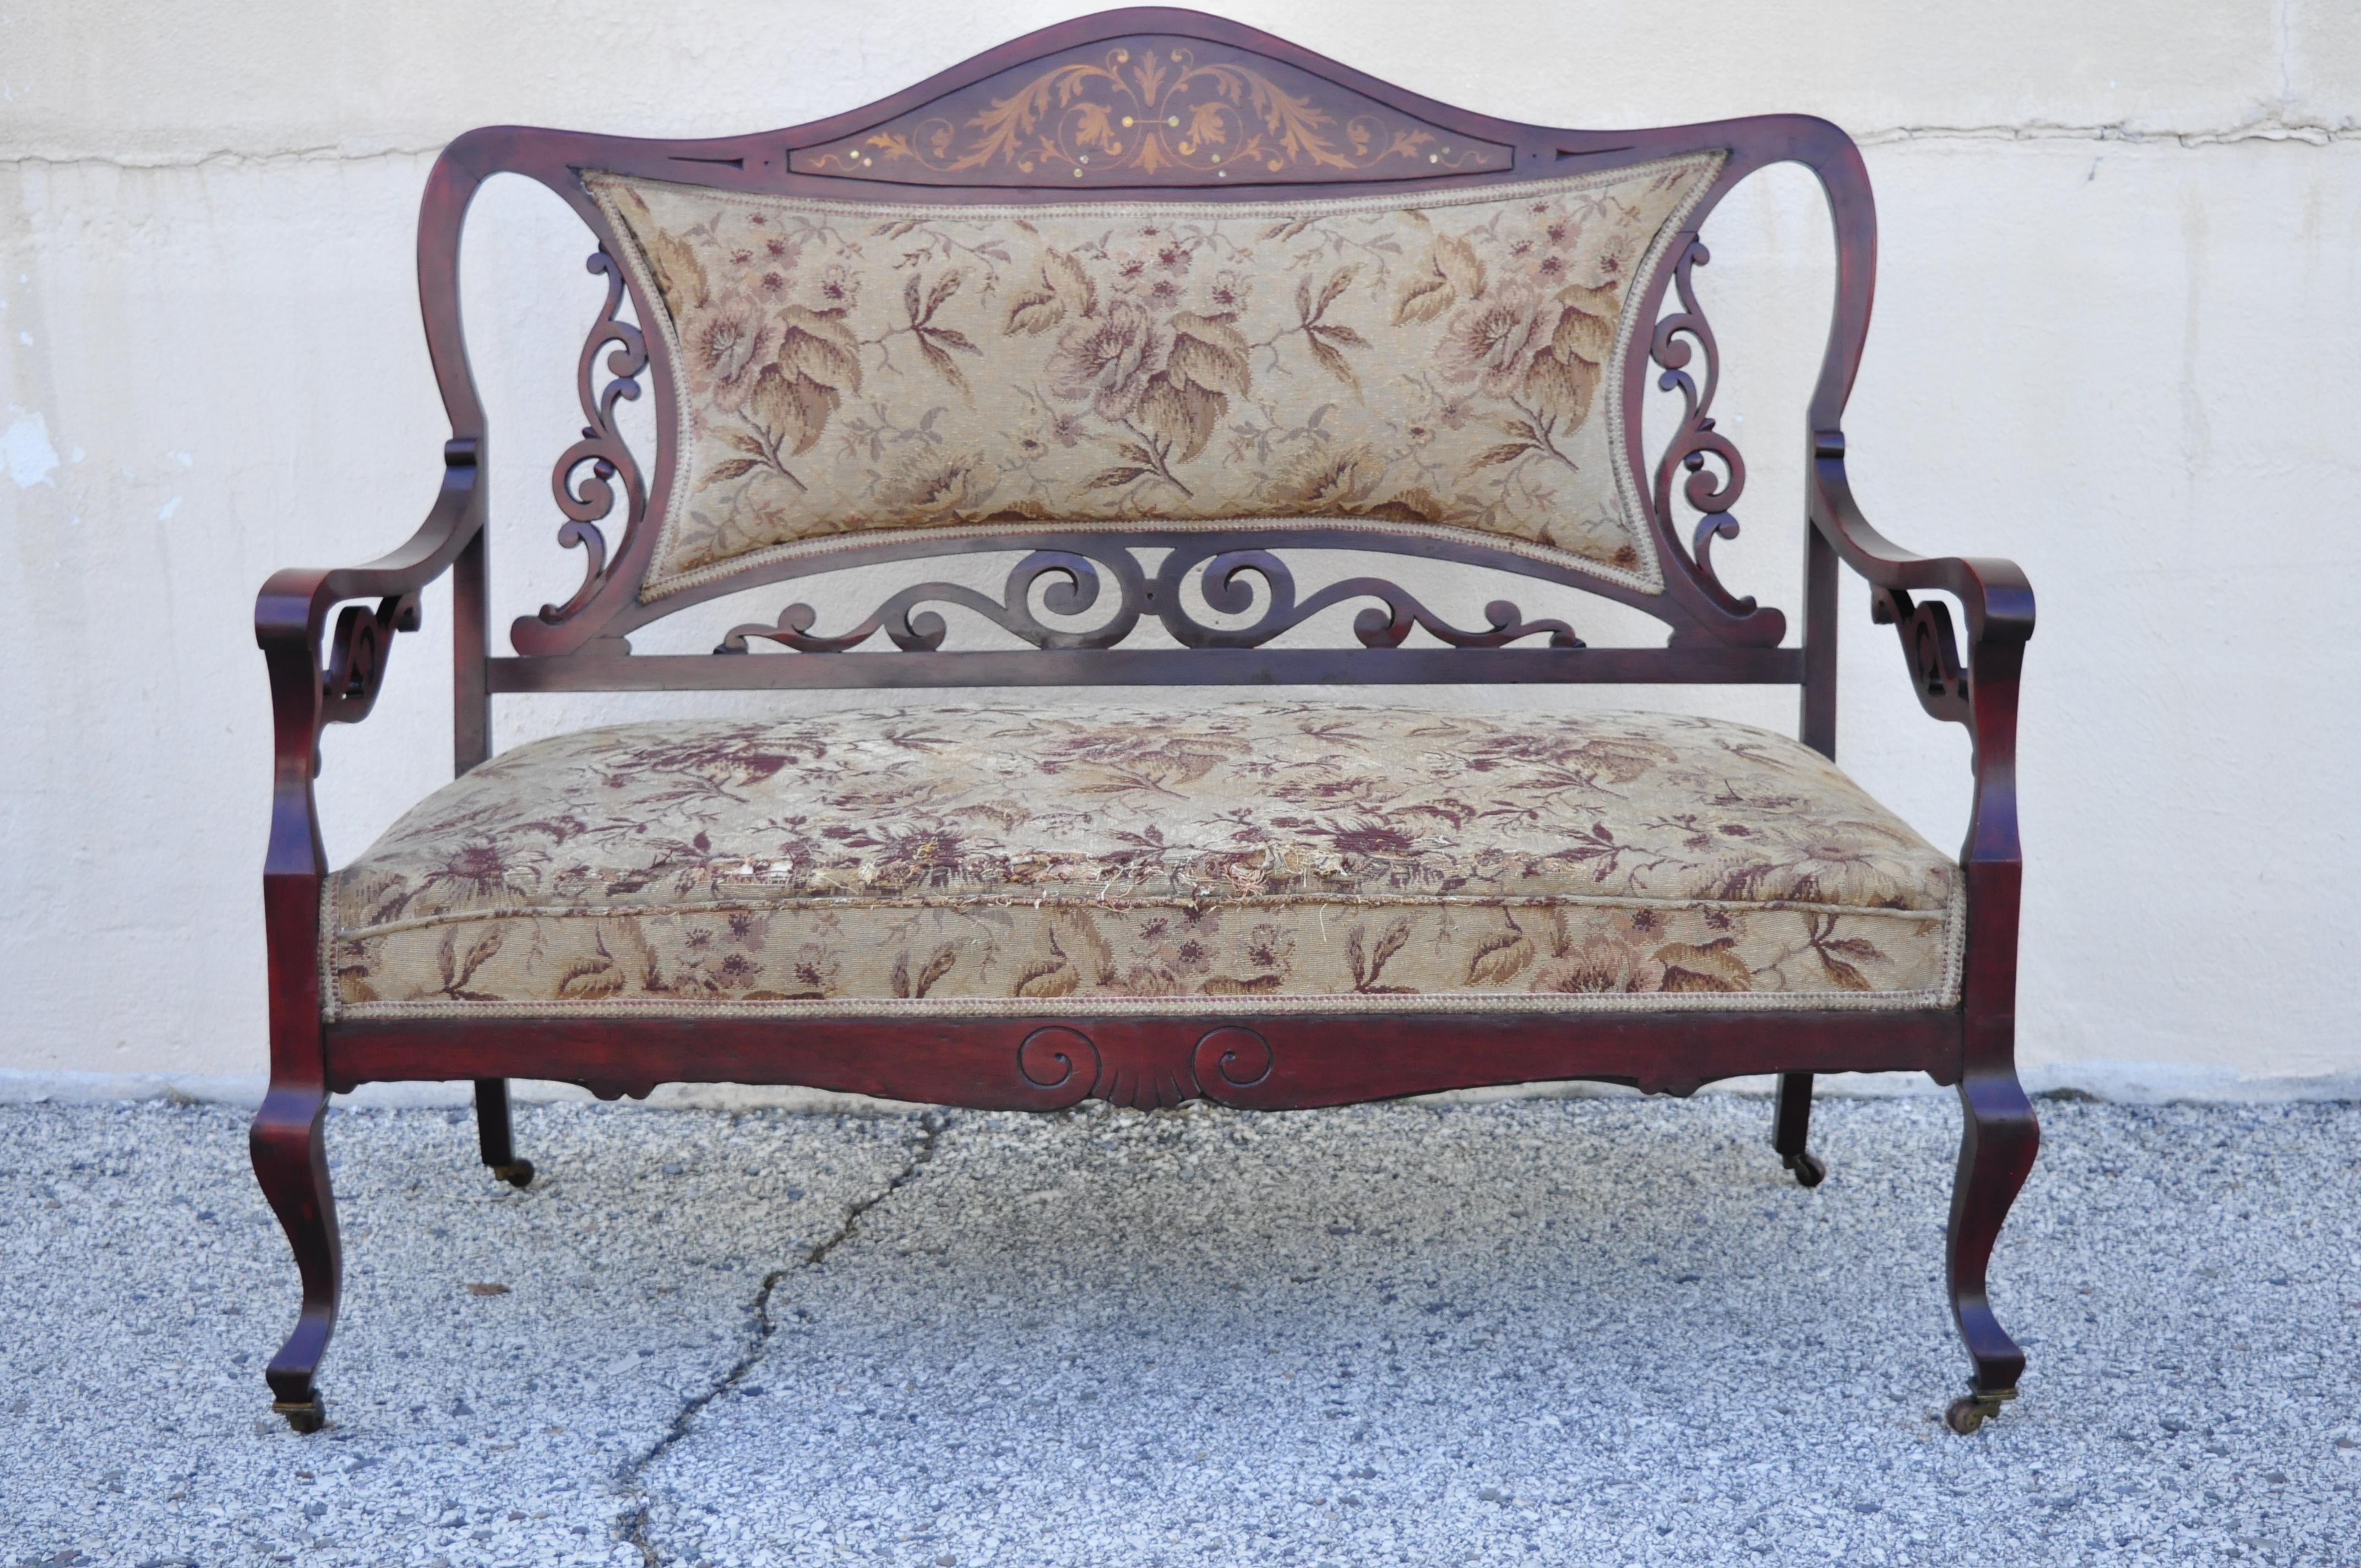 Antique Victorian mother of pearl satinwood inlay mahogany sofa & 2 chairs parlor set, 3-piece set. Item features satinwood floral inlay, mother of pearl inlay, brass rolling casters, solid wood frame, beautiful wood grain, nicely carved scrollwork